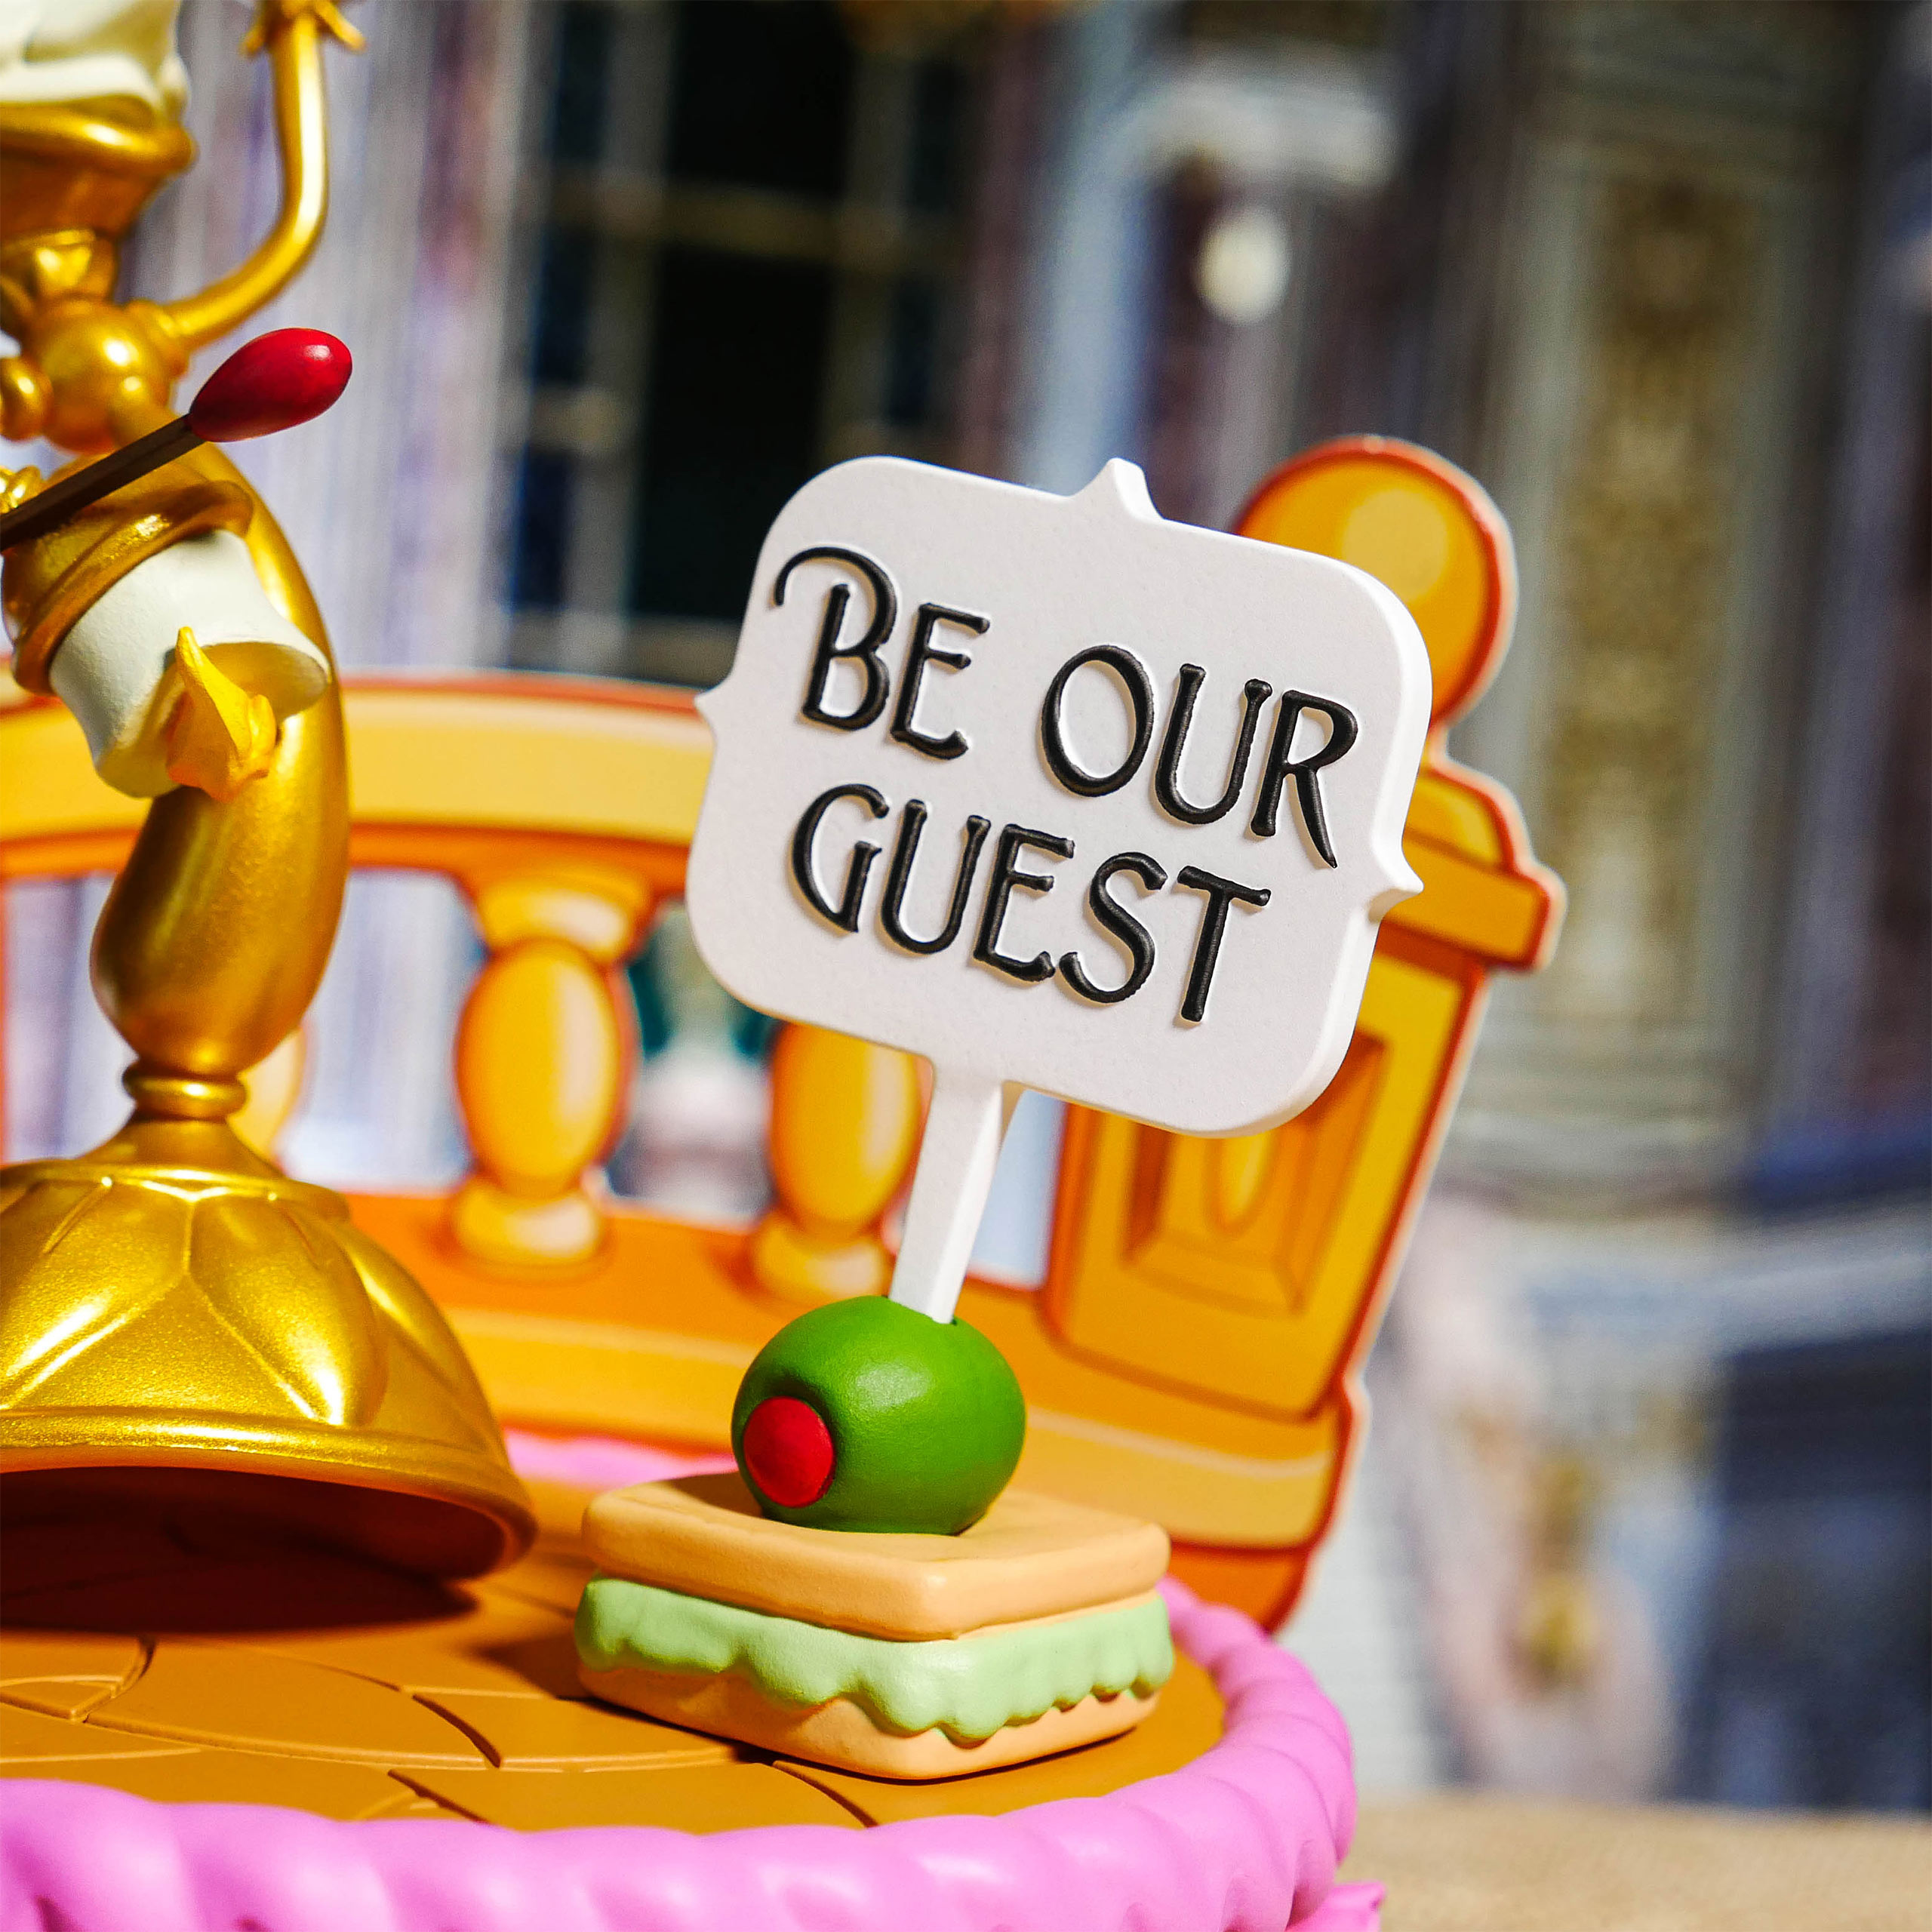 Beauty and the Beast - Be our Guest Diorama Figure